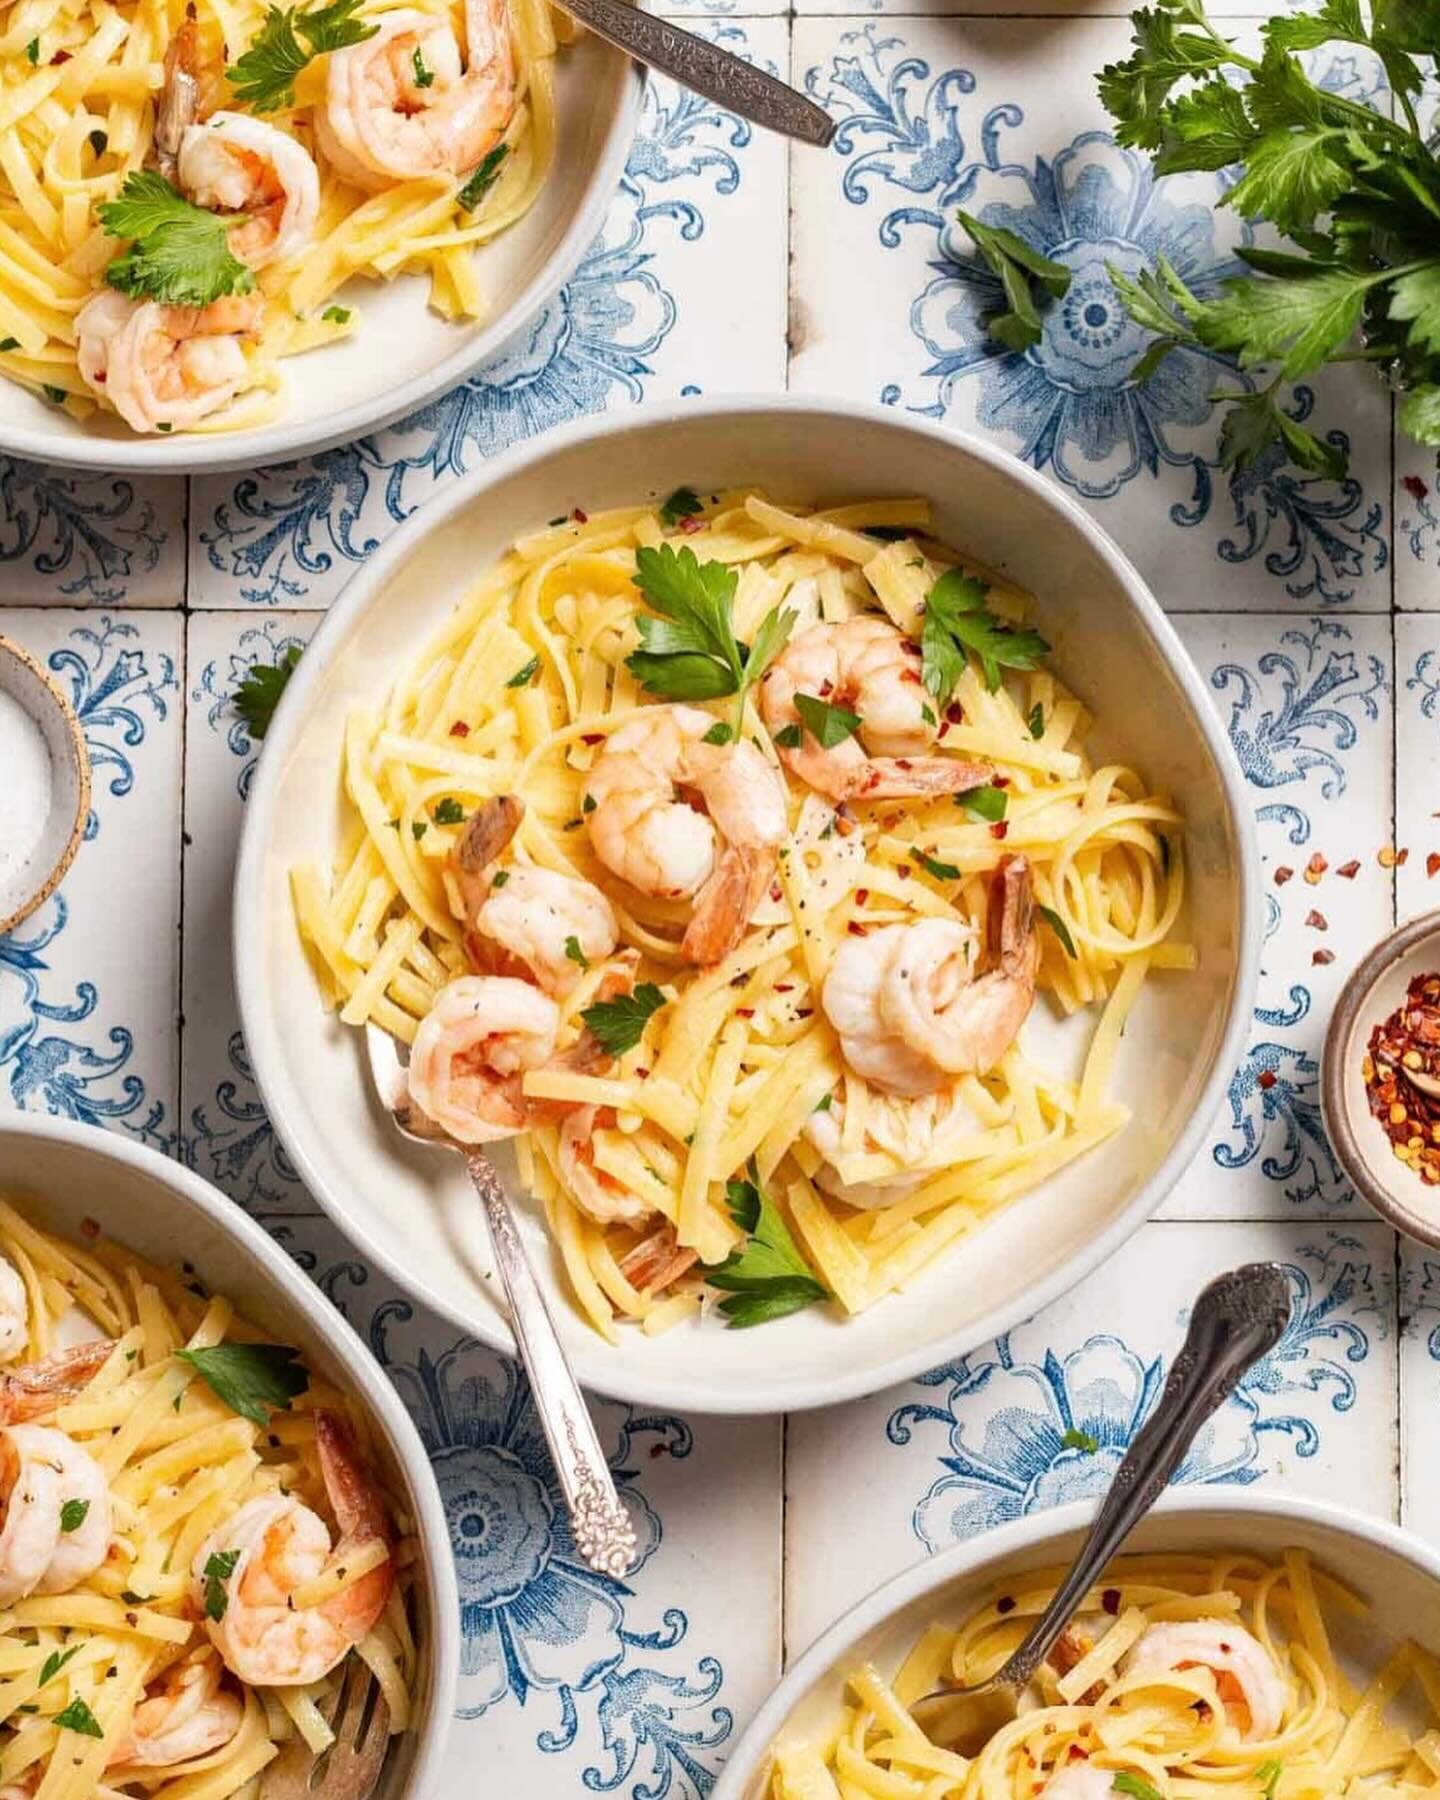 Shrimp Linguine 🍤 🦐 A classic for a reason.
.
📷: @kathwingrace 🌟
.
You can find my recipe on @themediterraneandish. Link 🔗 in my Stories and highlights: https://www.themediterraneandish.com/shrimp-linguine/
.
.
#shrimplinguine #linguinecongamber